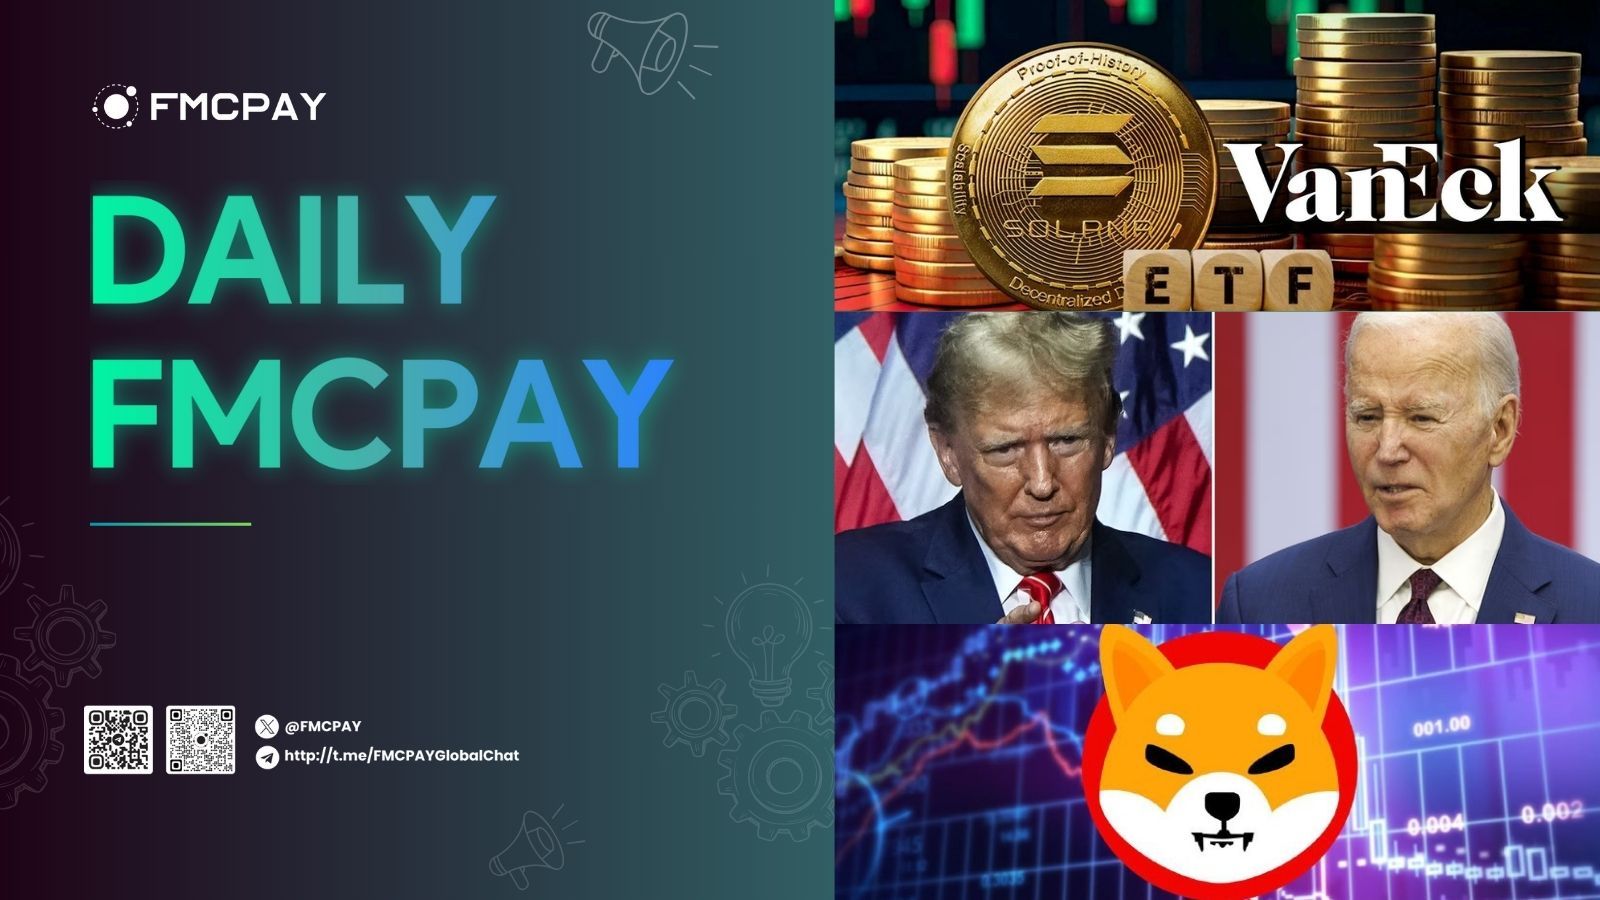 fmcpay vaneck researcher matthew siegel believes solana etf approval comes